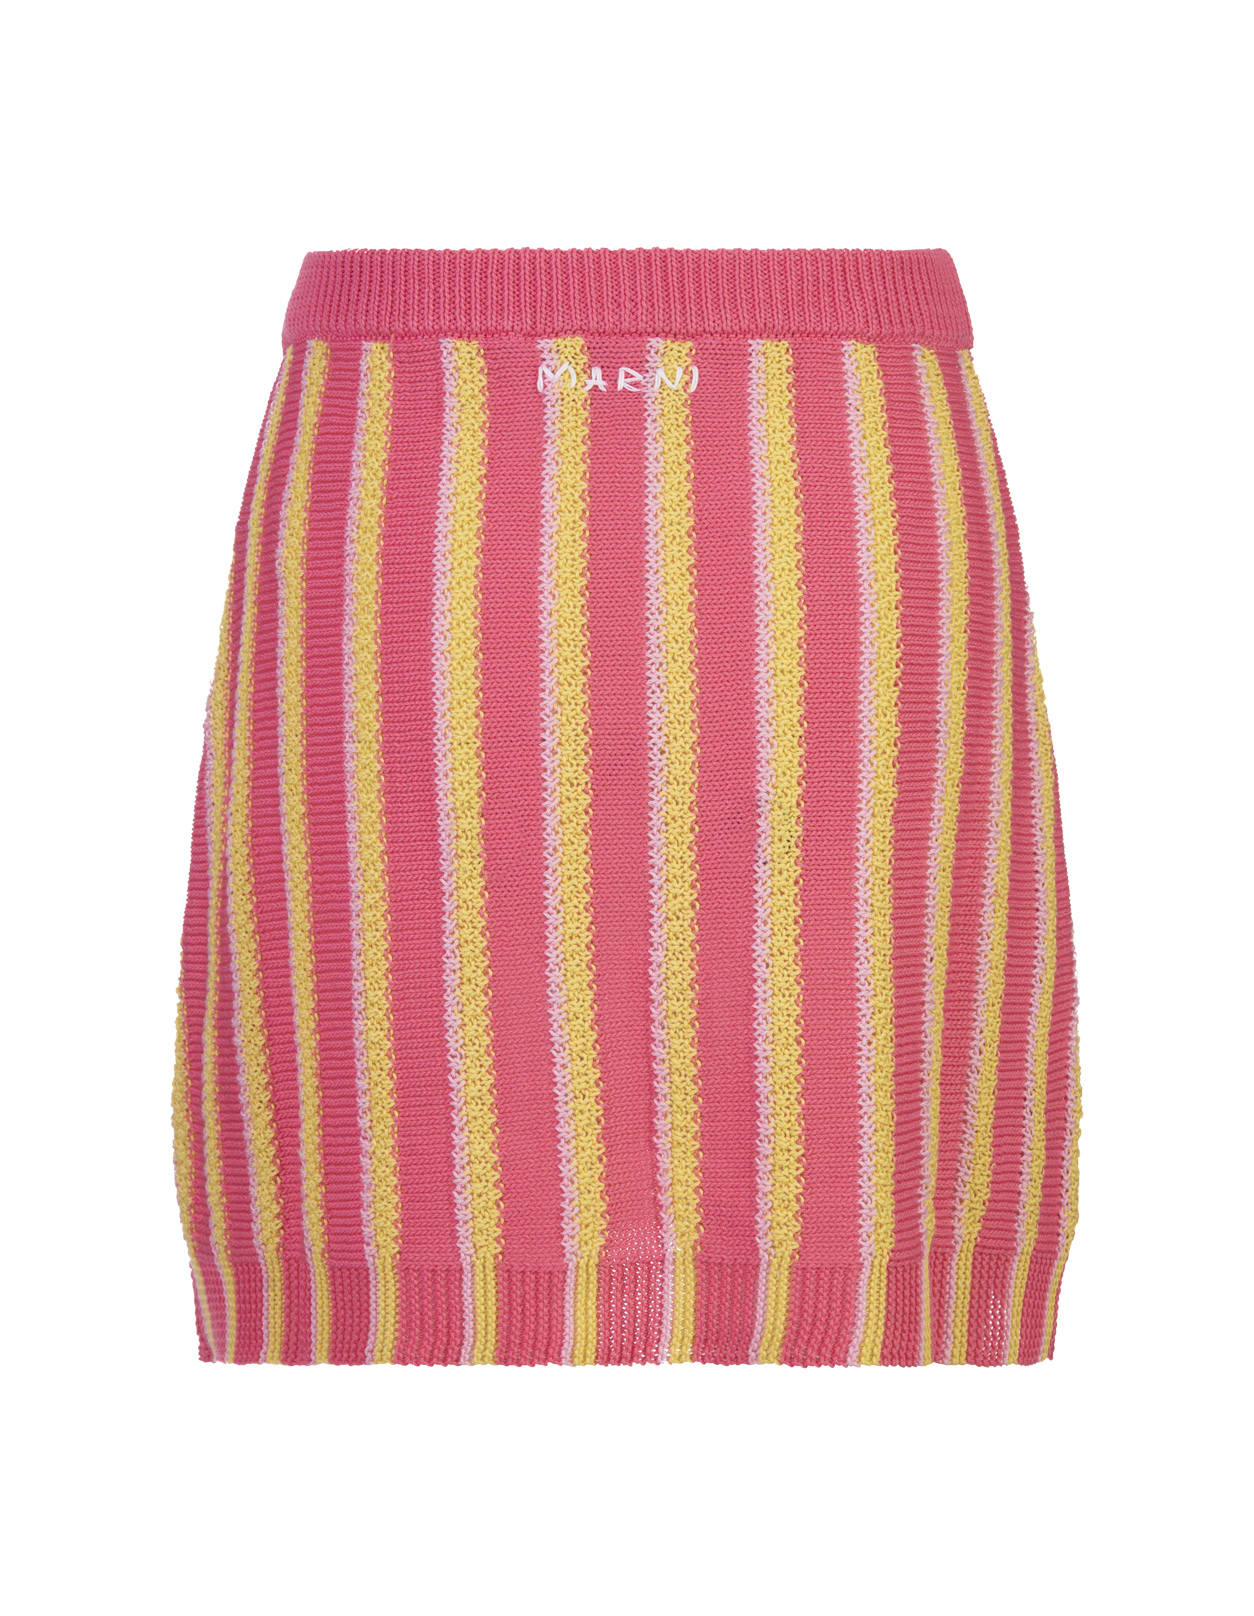 Shop Marni Pink, Yellow And White Striped Knitted Mini Skirt